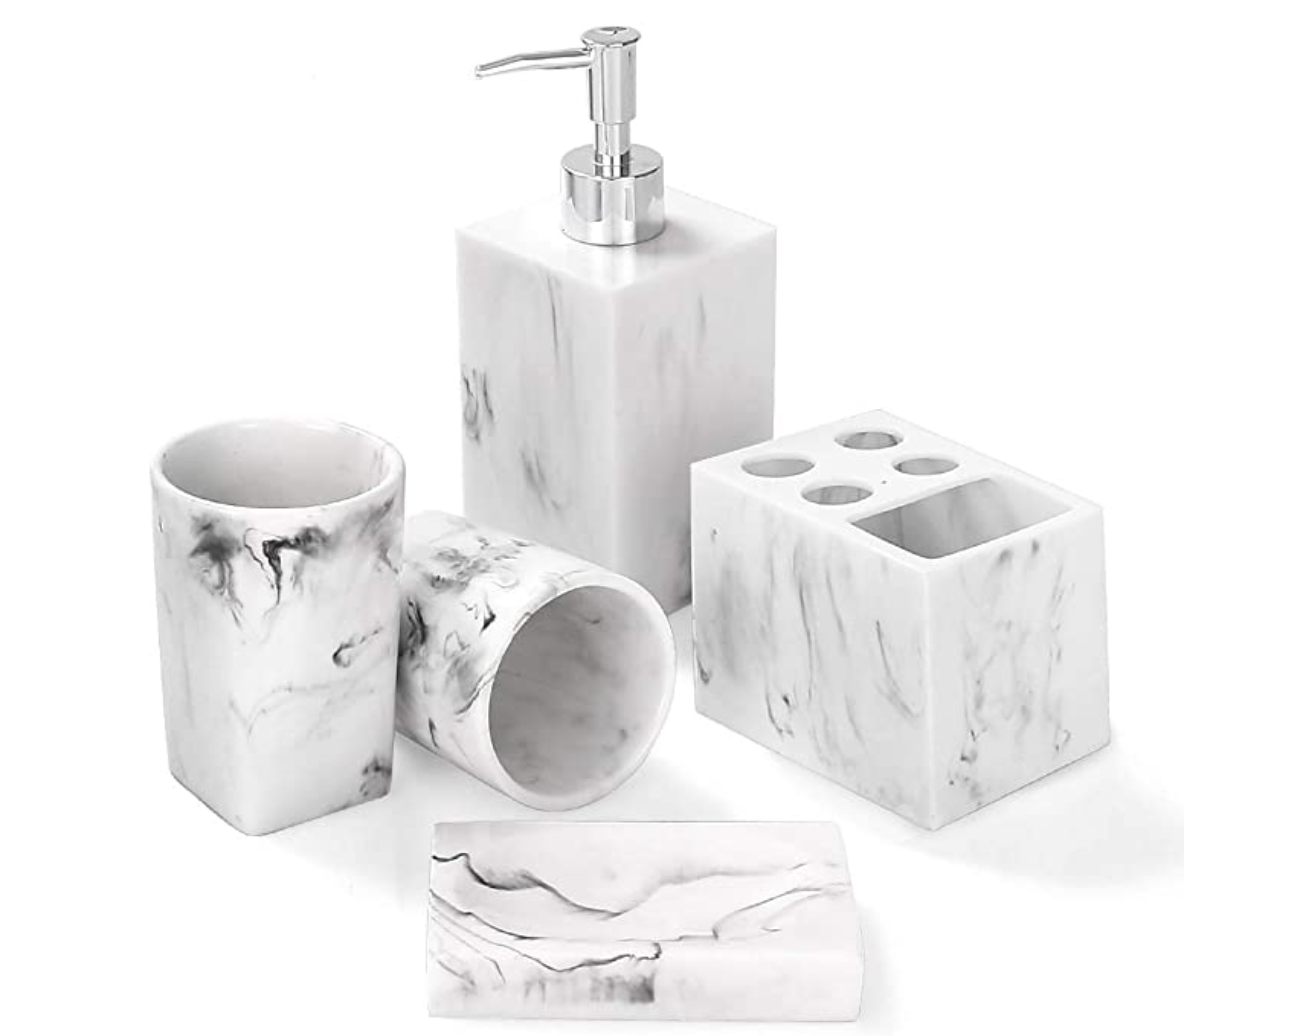 Bathroom Accessories Set, 5 Piece Marble Complete Bathroom Set for Bath Decor, Includes Toothbrush Holder, Soap Dispenser, Soap Dish, 2 Tumblers, Ink White